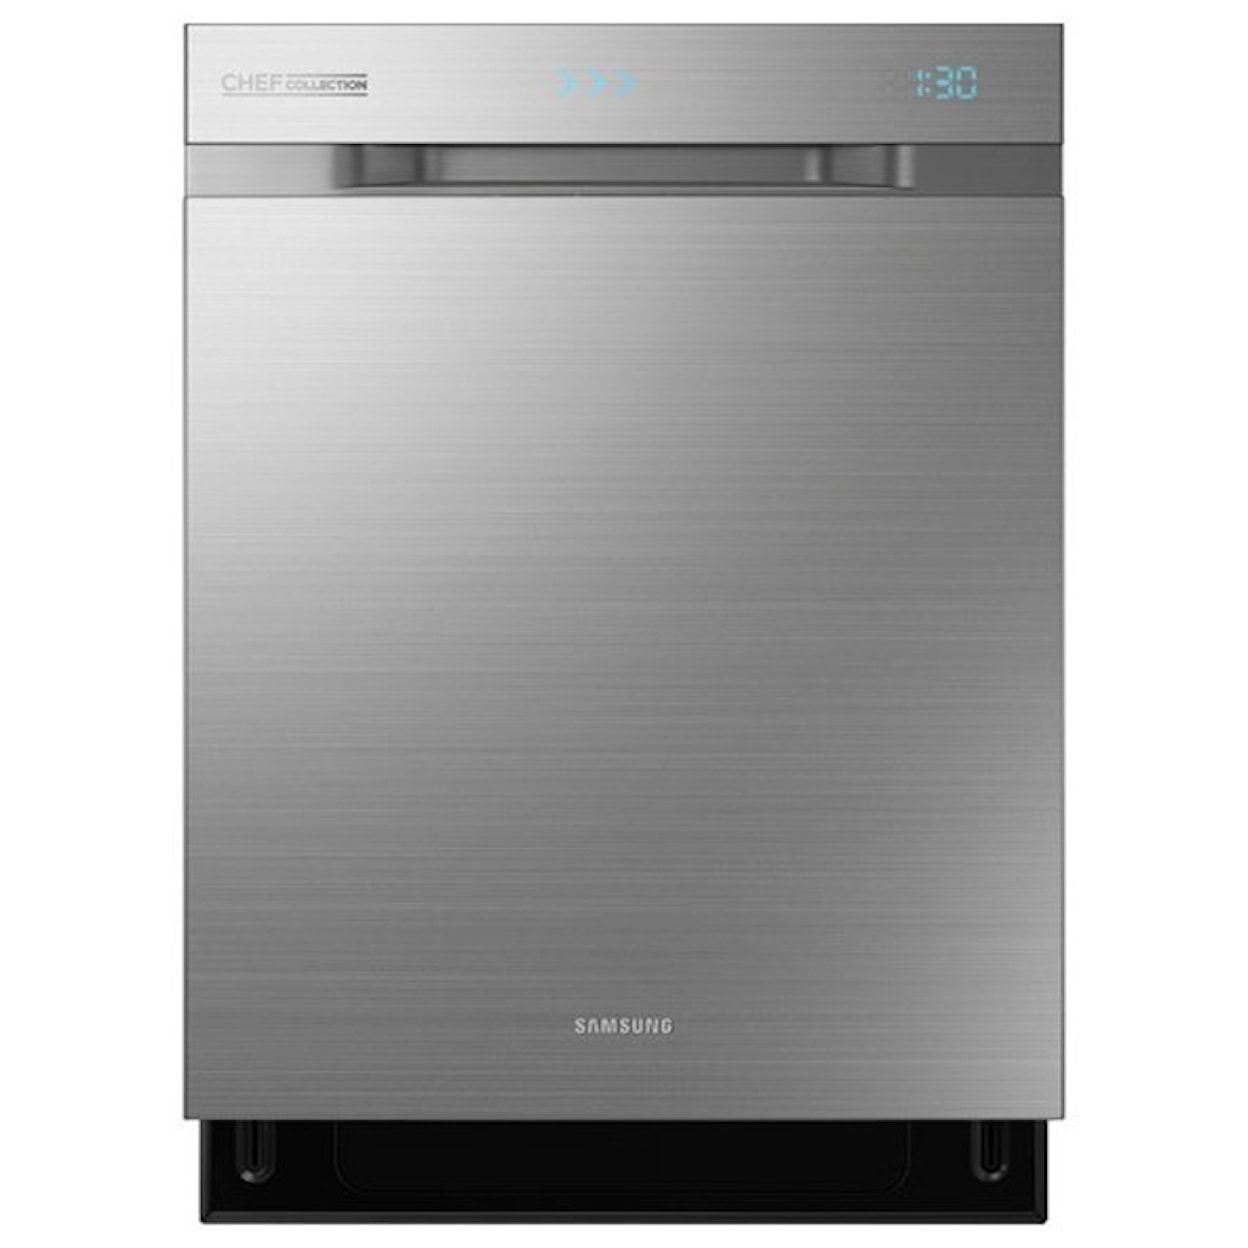 Samsung Appliances Dishwashers Top Control Chef Collection Dishwasher